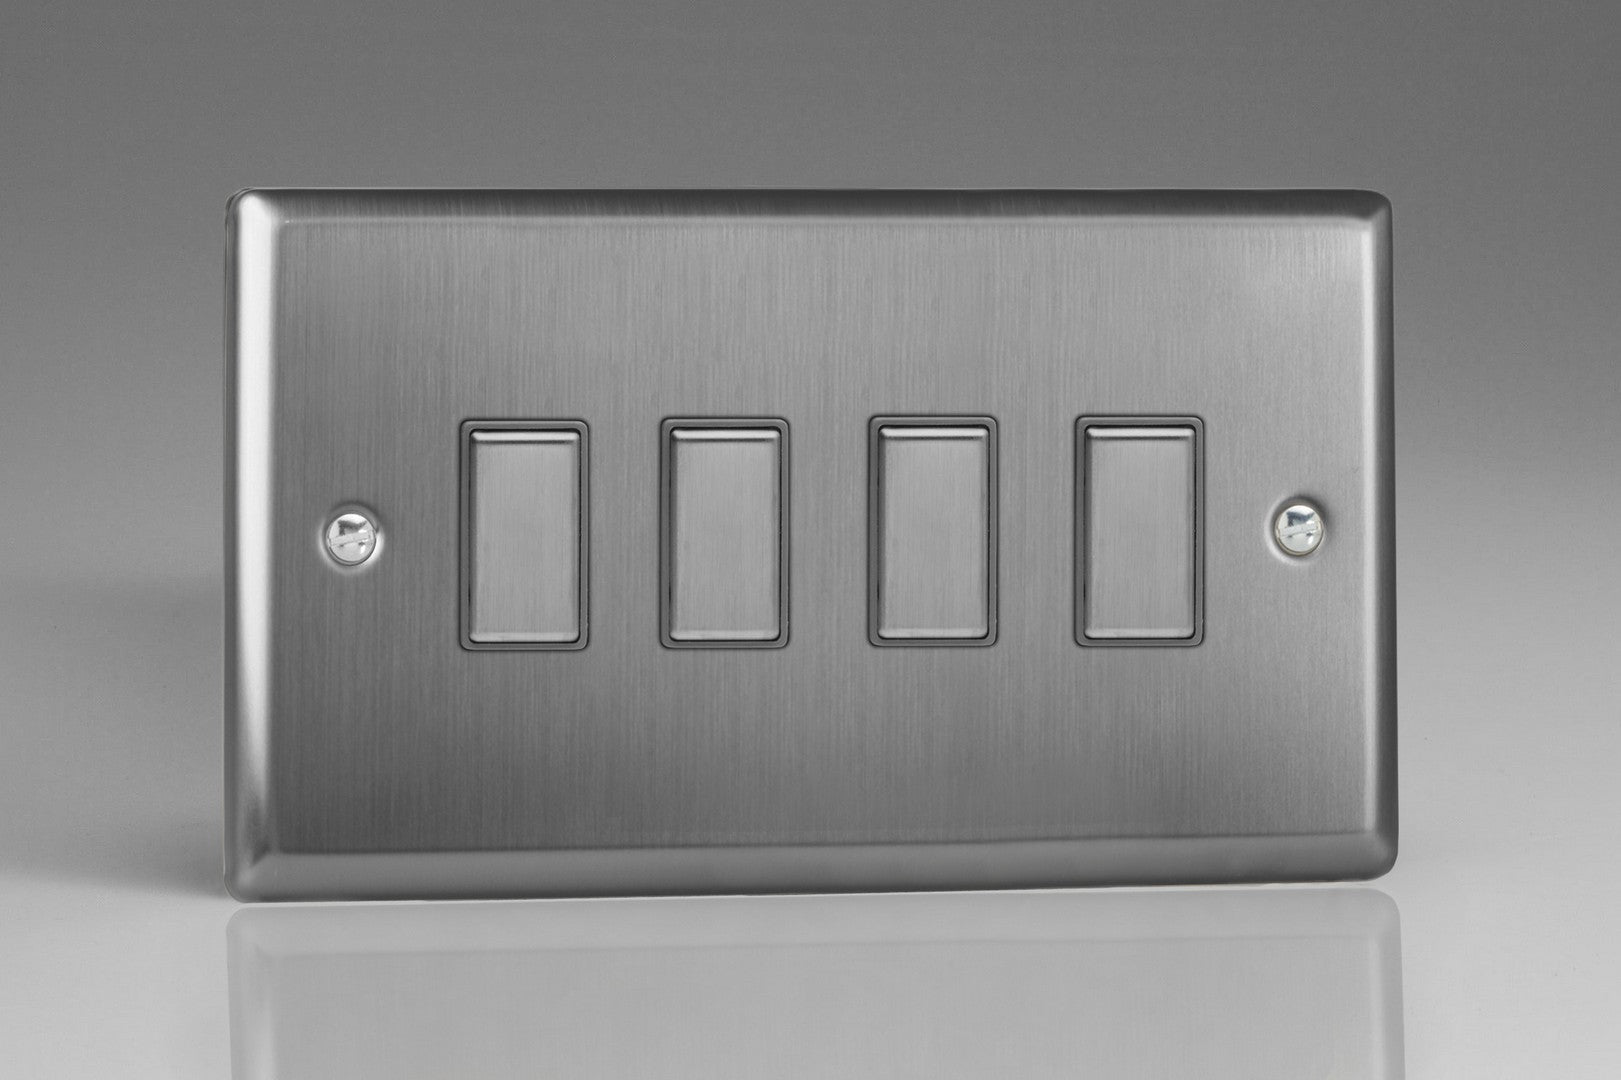 Varilight JTES004 Classic Brushed Steel 4-Gang Tactile Touch Control Dimming Slave for use with Multi-Point Touch or Remote Master on 2-Way Circuits (Twin Plate)